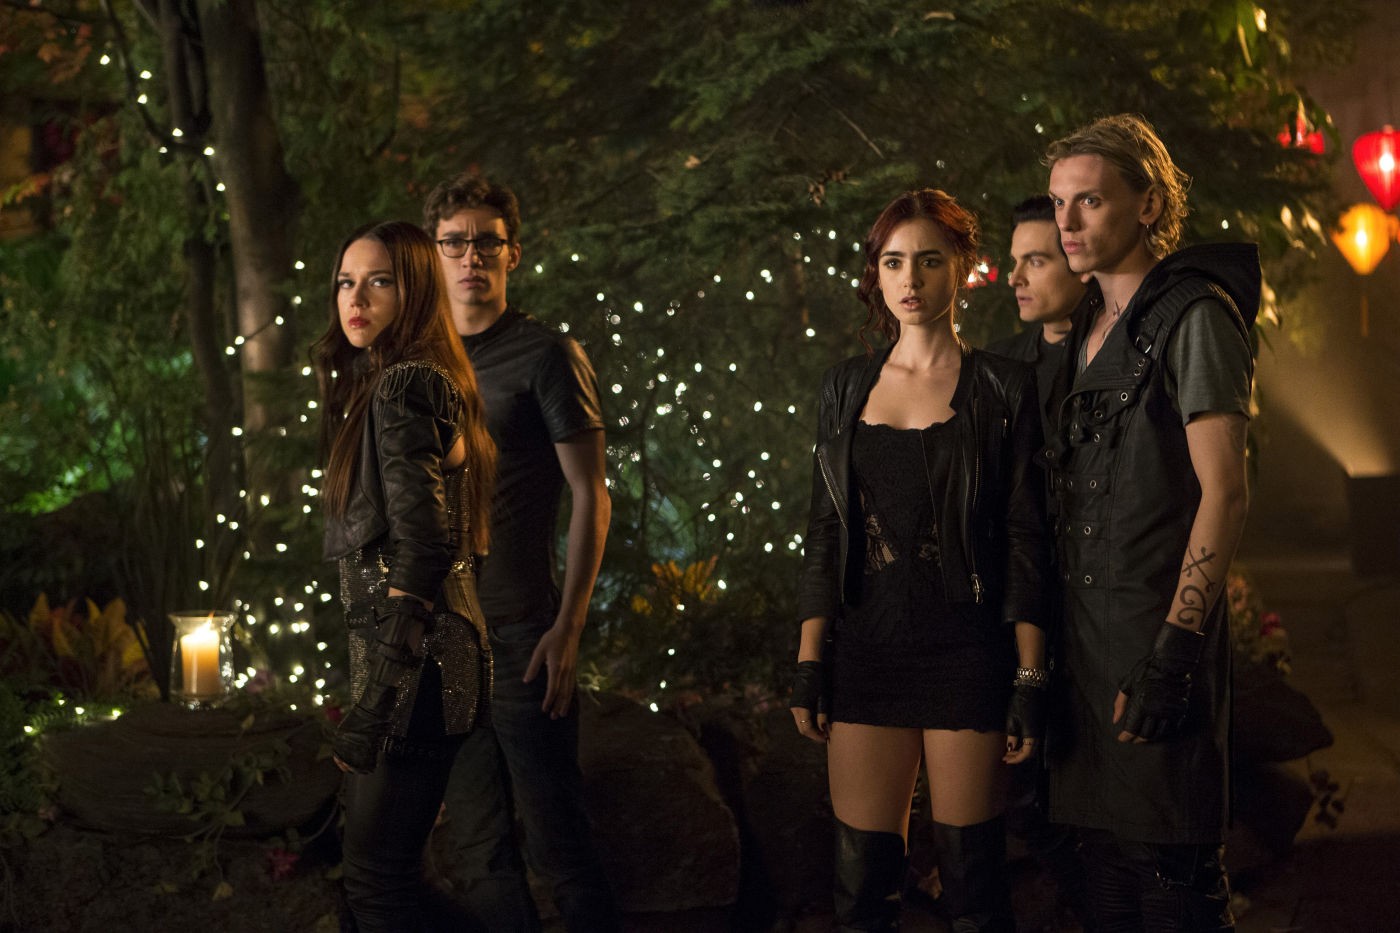 Jemima West, Robert Sheehan, Lily Collins and Jamie Campbell Bower in Screen Gems' The Mortal Instruments: City of Bones (2013)